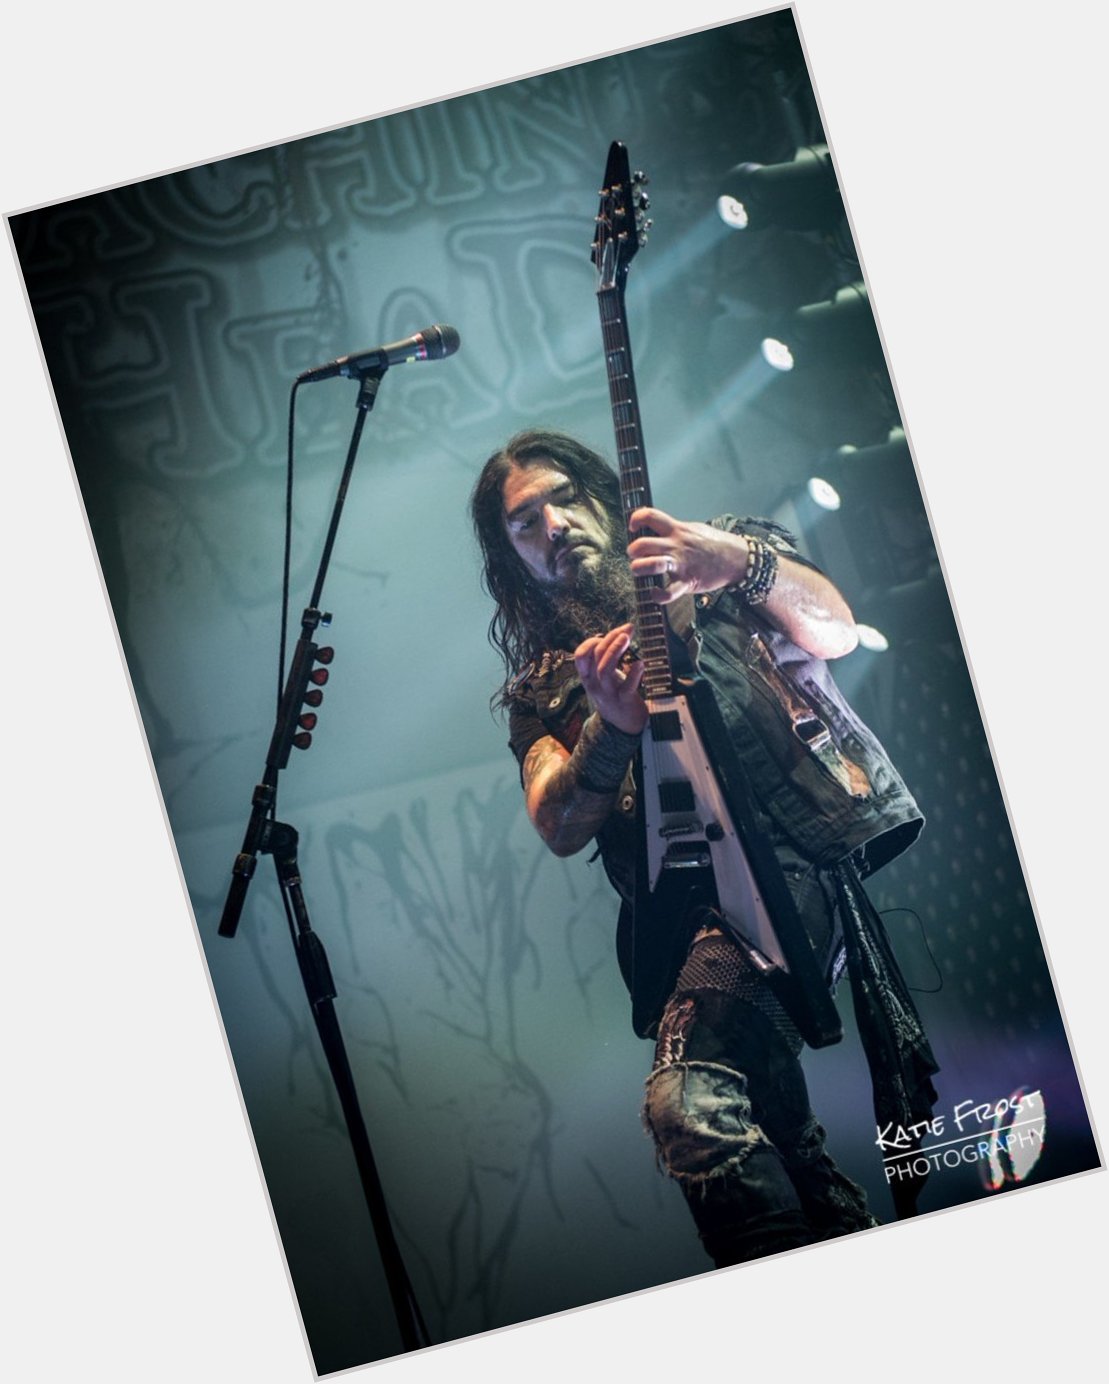 Happy birthday Robb Flynn Looking forward to seeing again later this year  